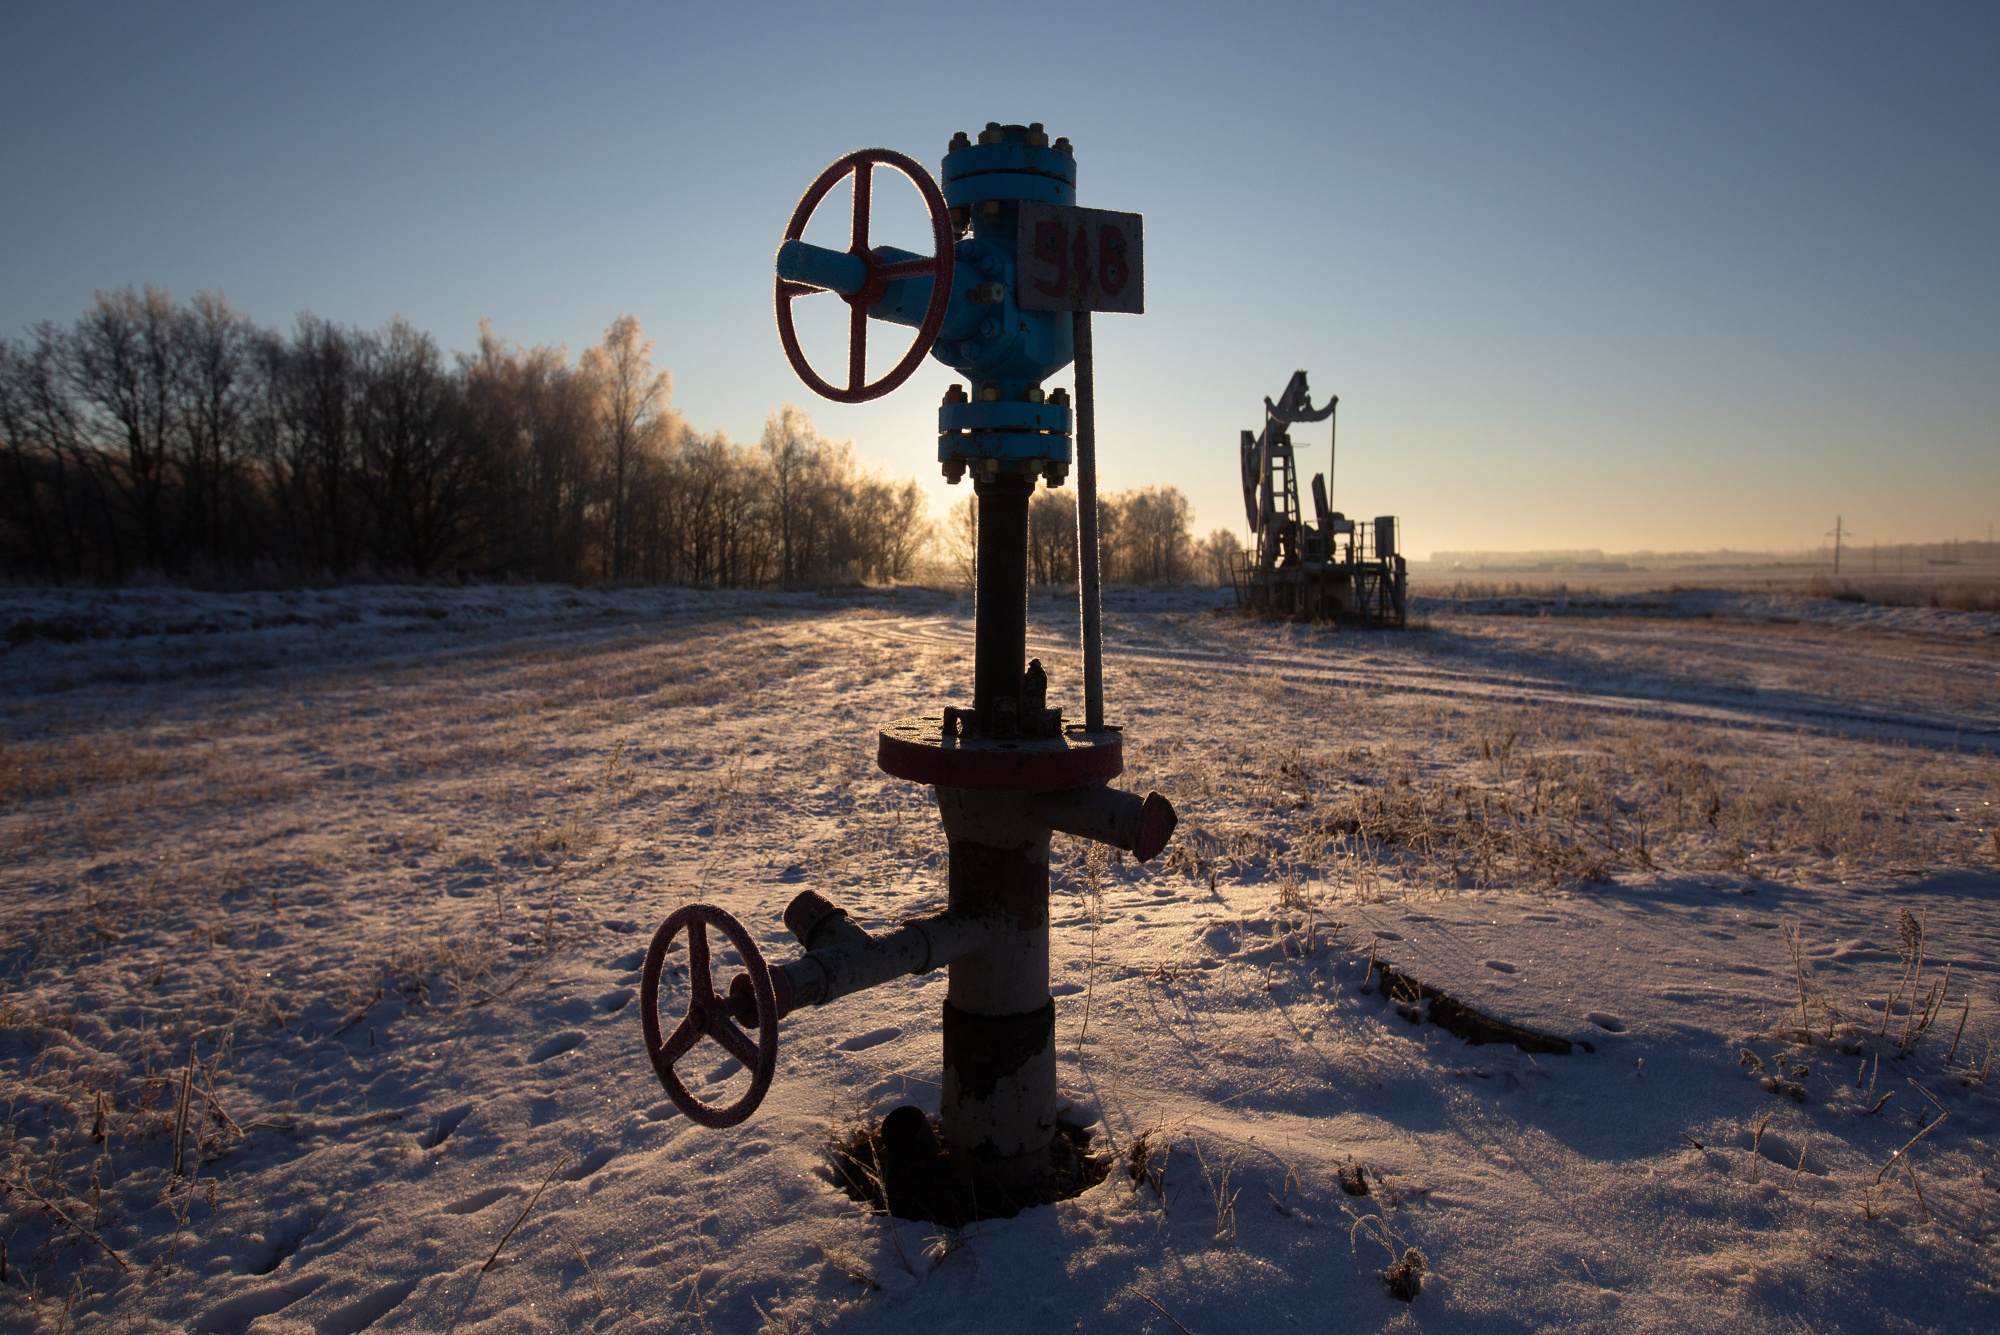 Sanctions are crimping Russia’s crude flows